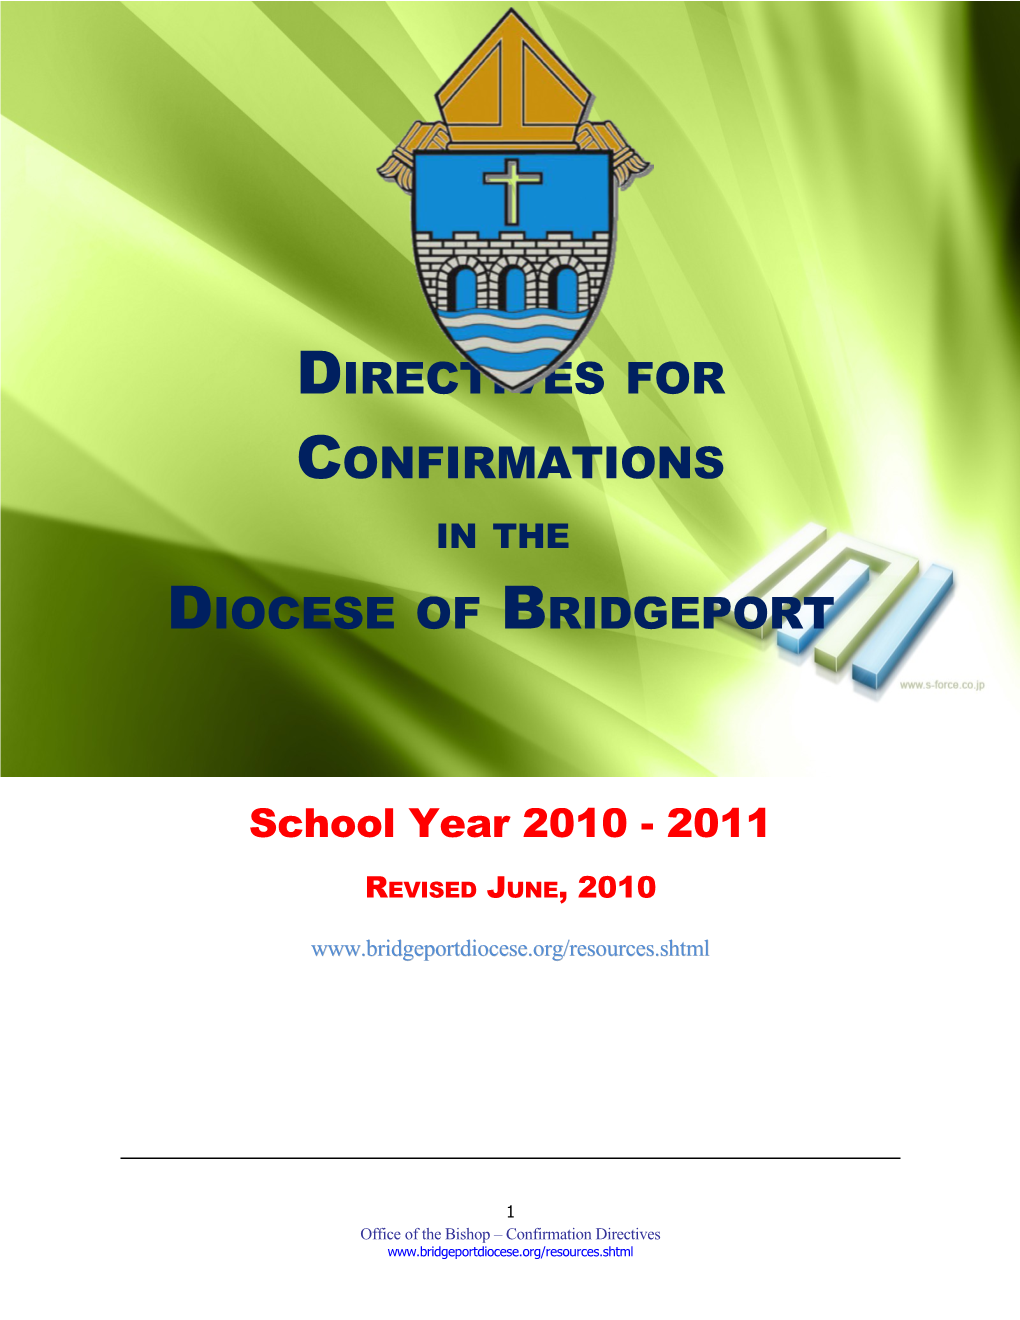 Directives for Confirmations